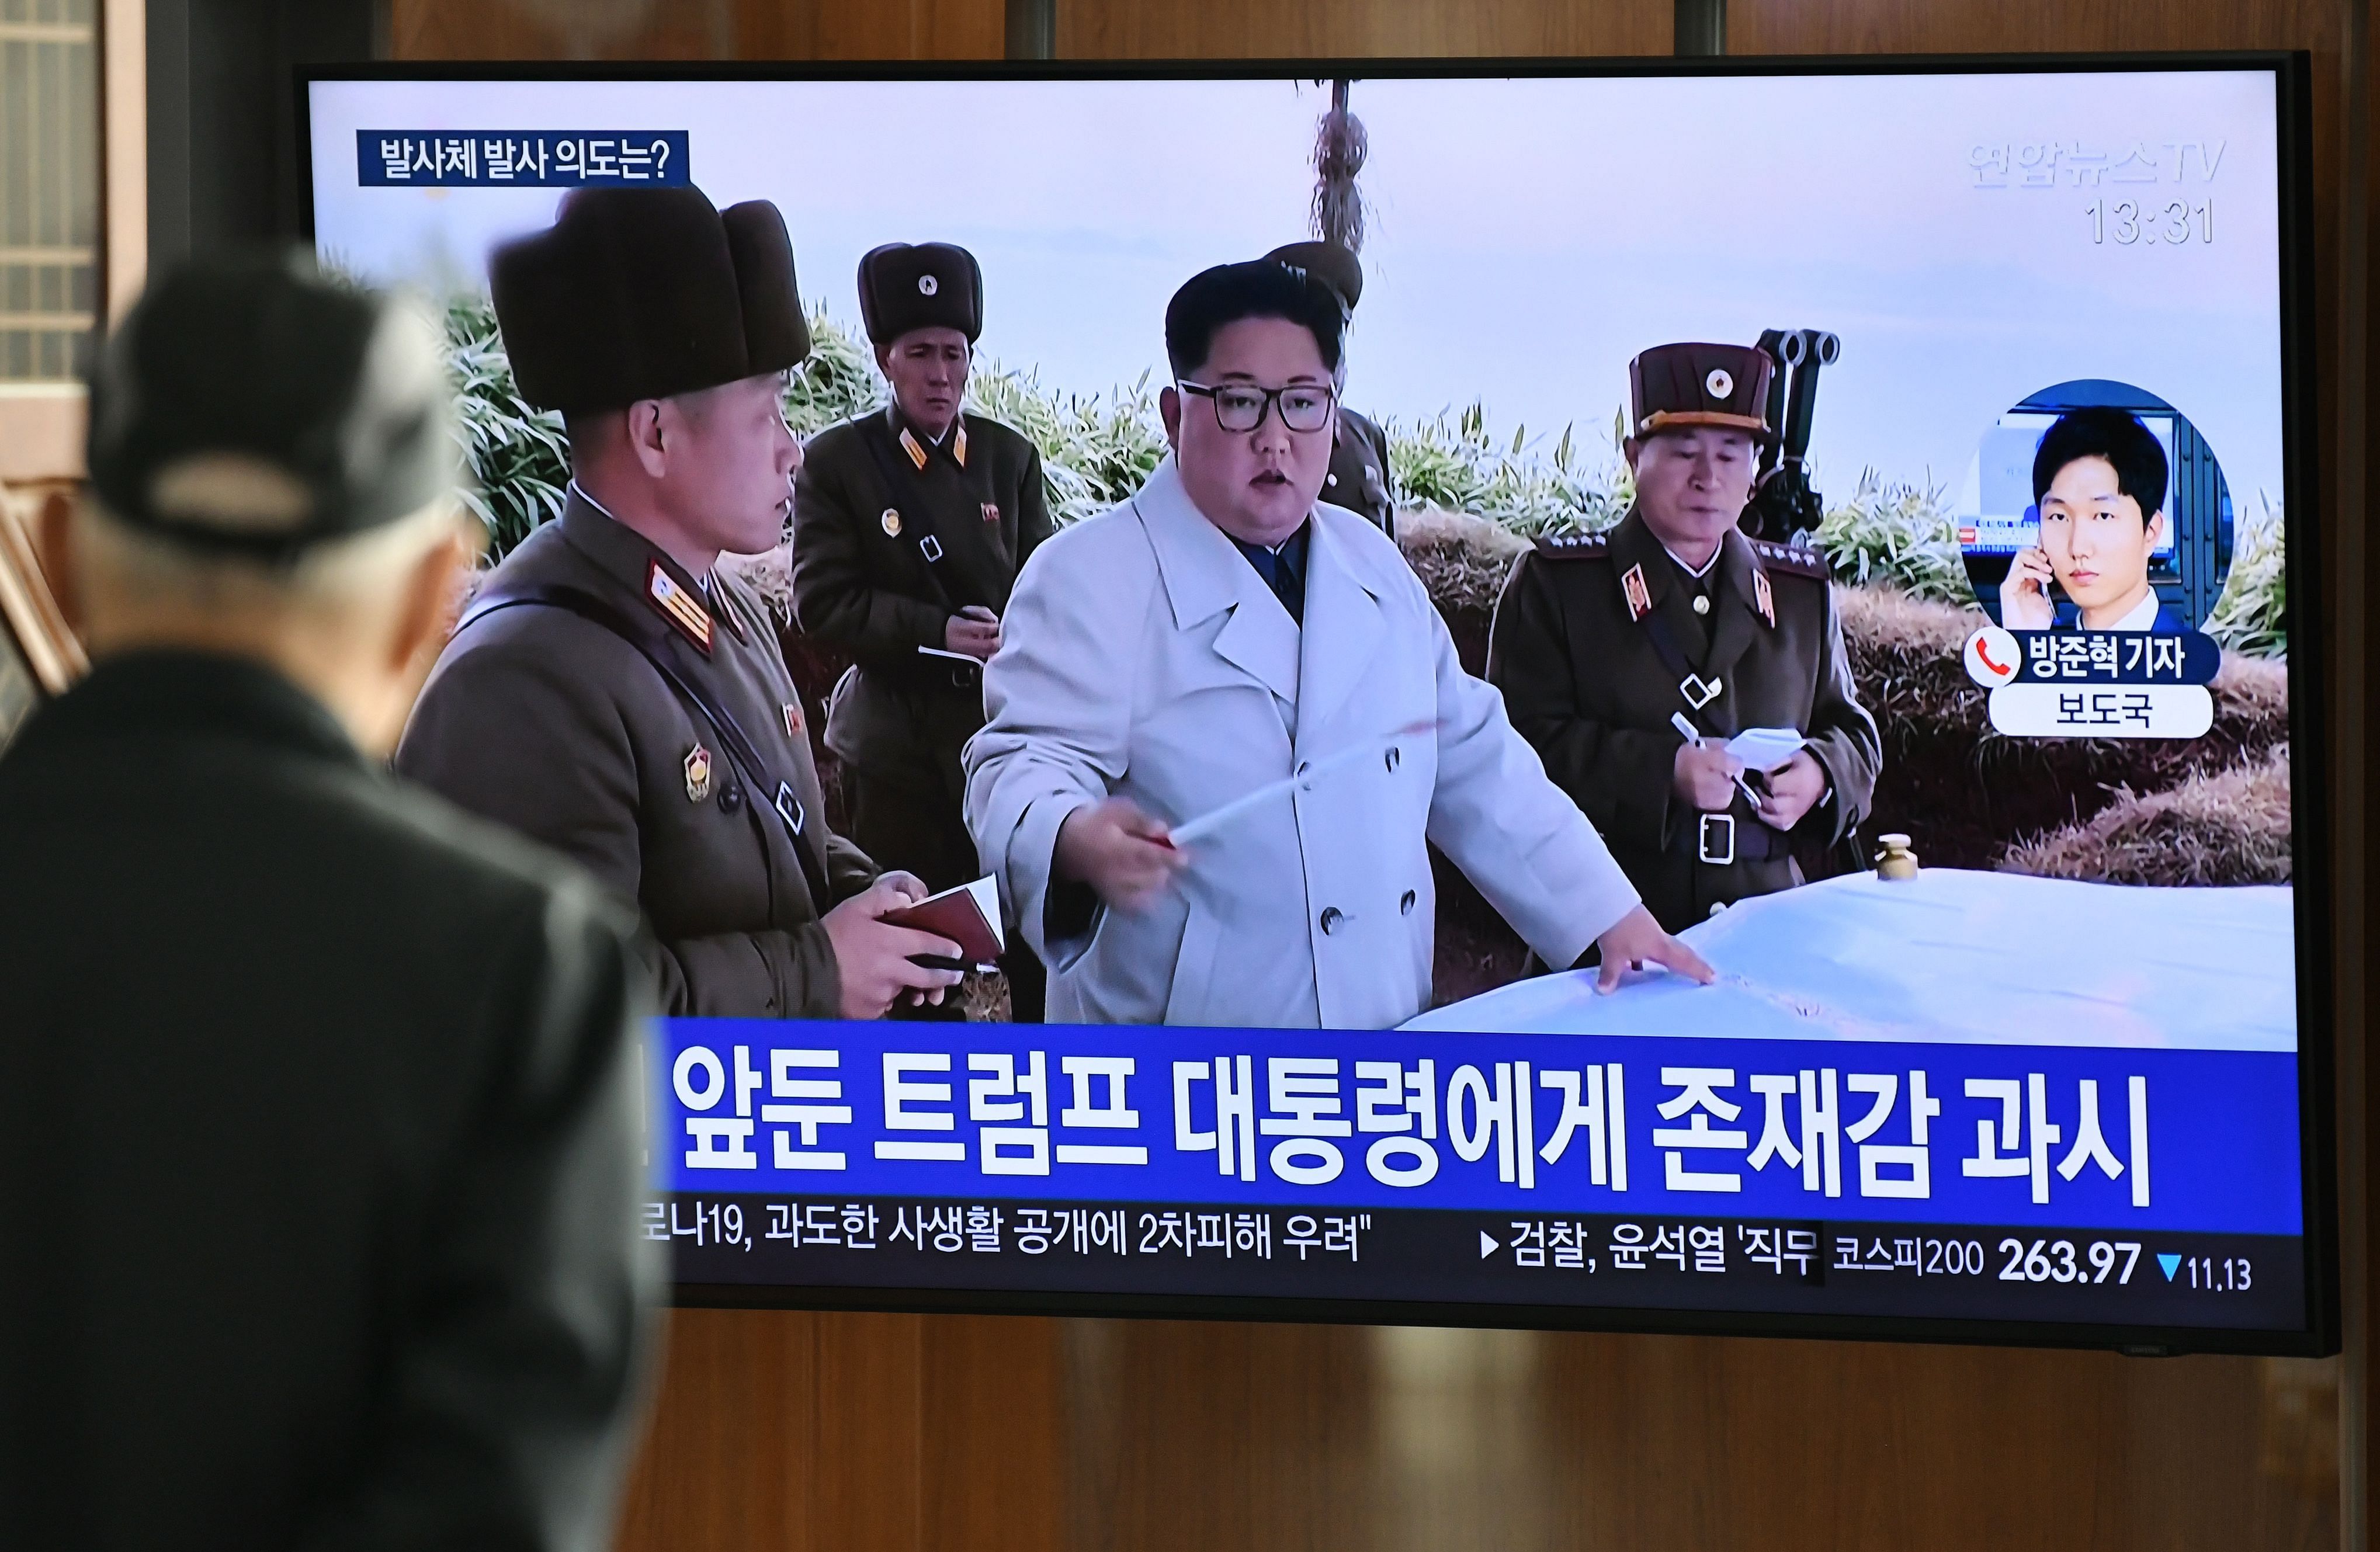 A man watches a television news broadcast showing file footage of North Korea's leader Kim Jong Un, at a railway station. (AFP Photo)